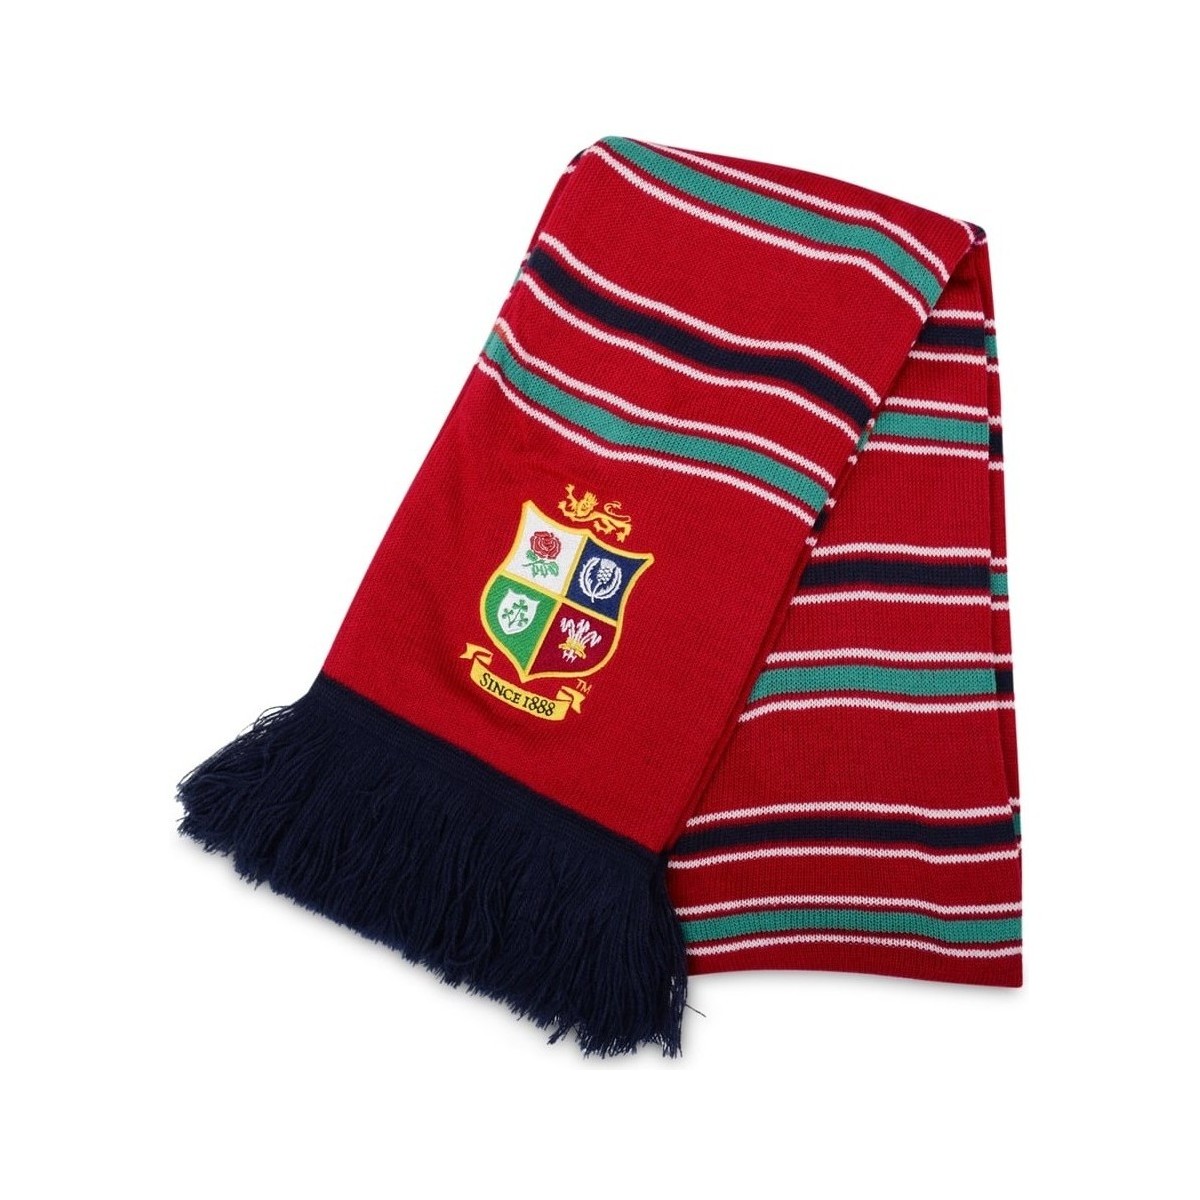 Accessoires textile Echarpes / Etoles / Foulards Canterbury ECHARPE RUGBY THE BRITISH AND Rouge